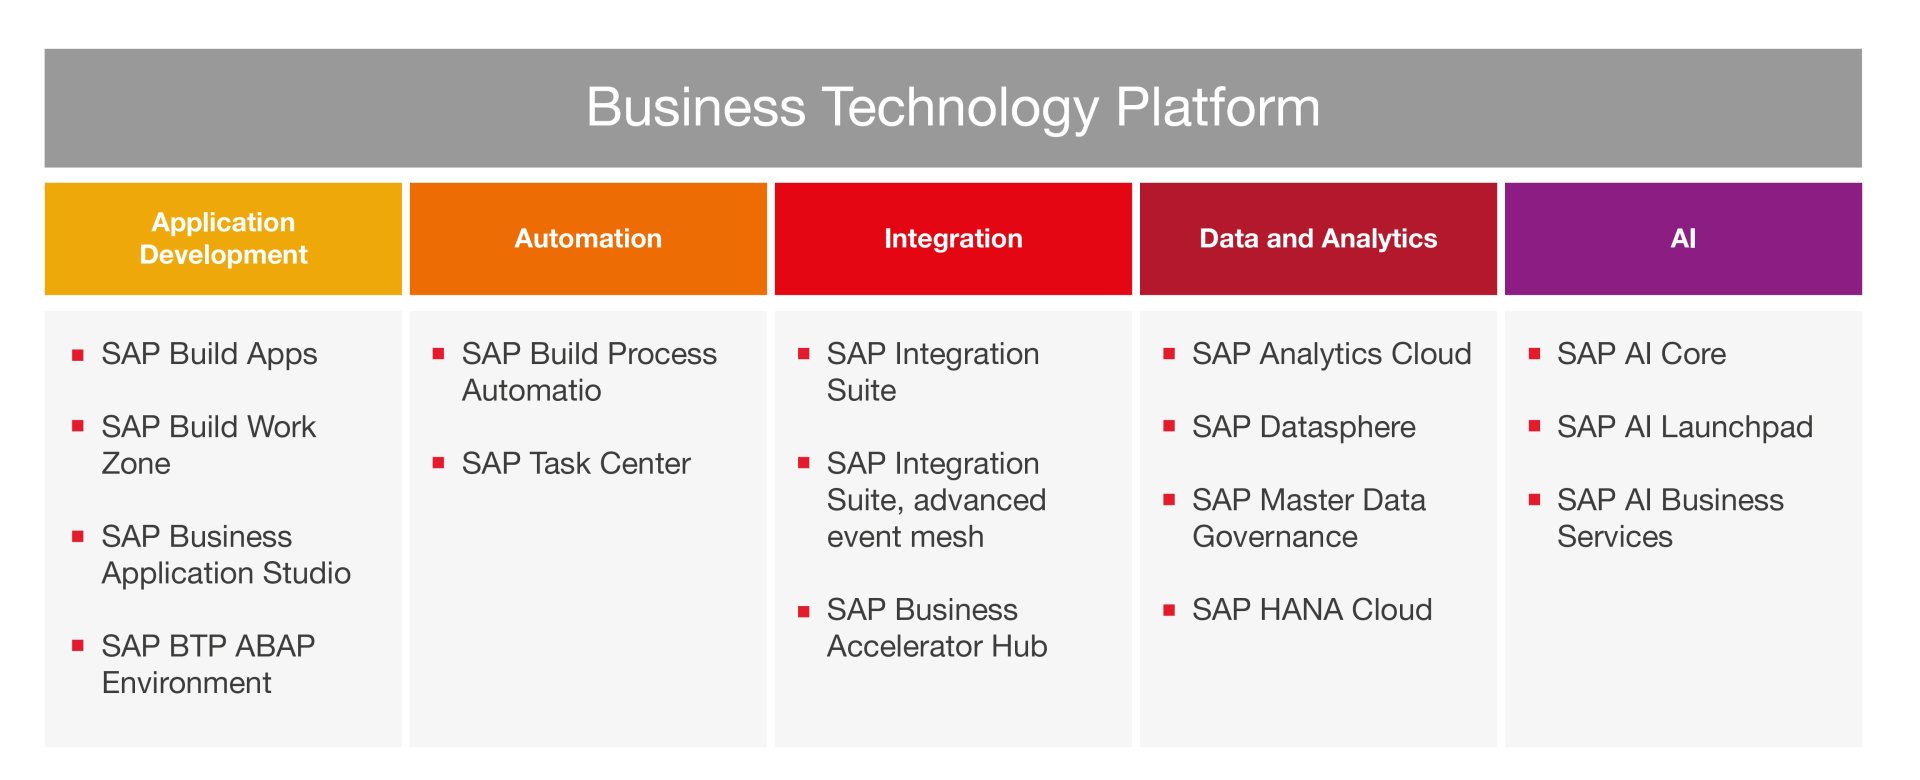 Functions of the Business Technology Platform